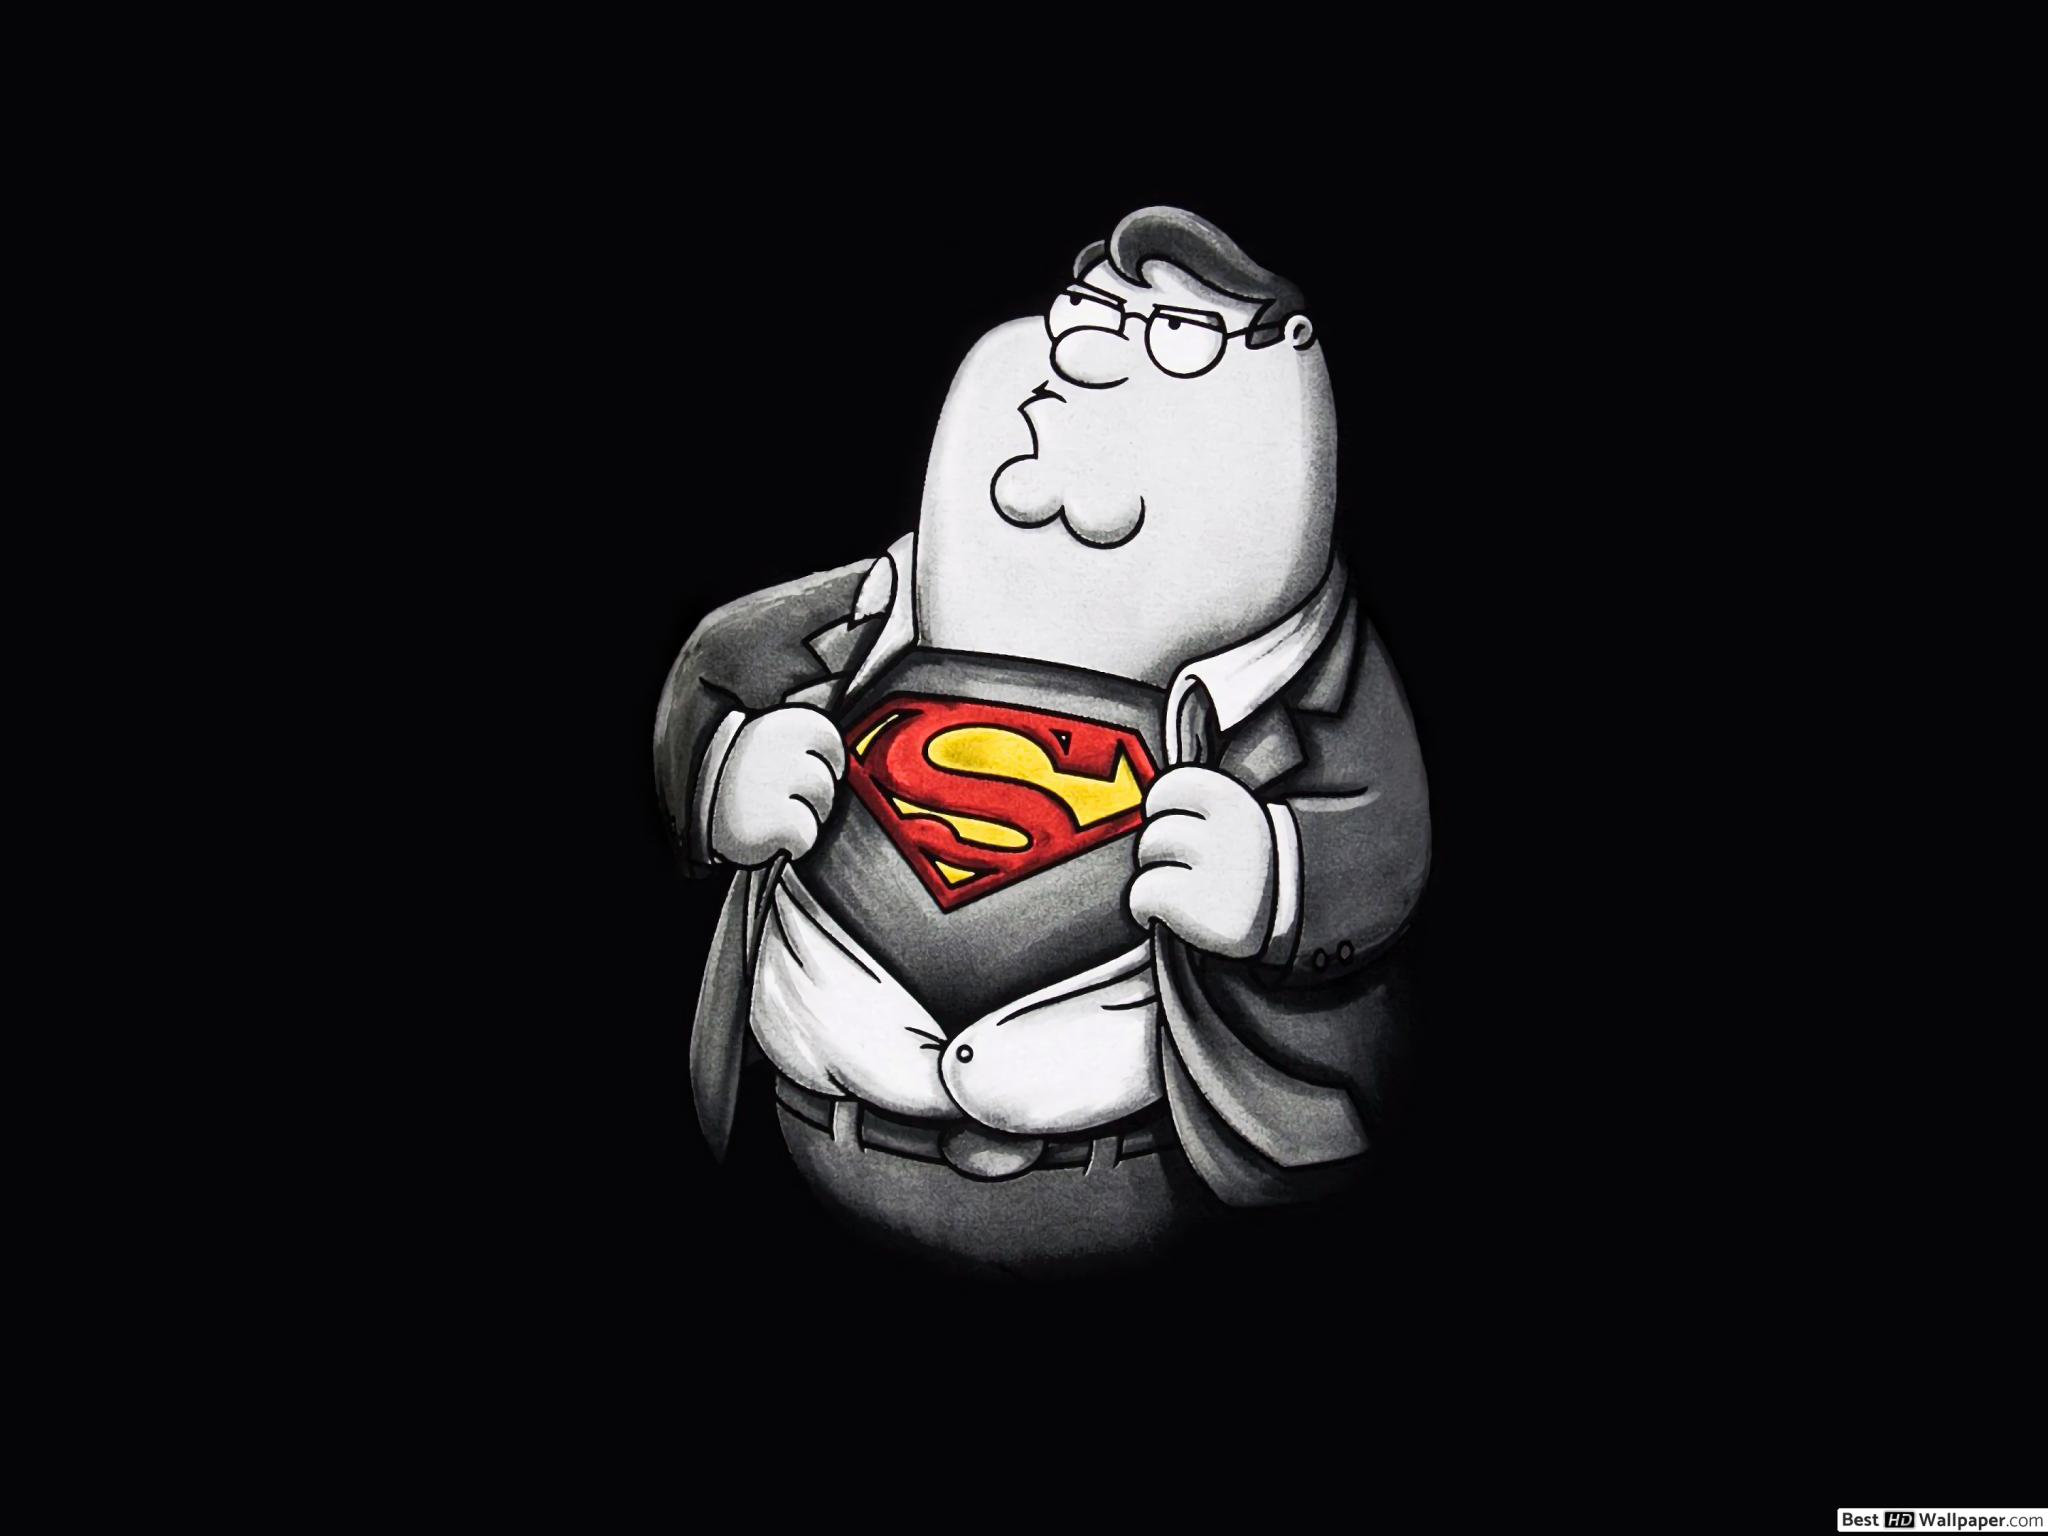 Apple Ipad Air 1 & 2, - Family Guy Peter Griffin Superman , HD Wallpaper & Backgrounds